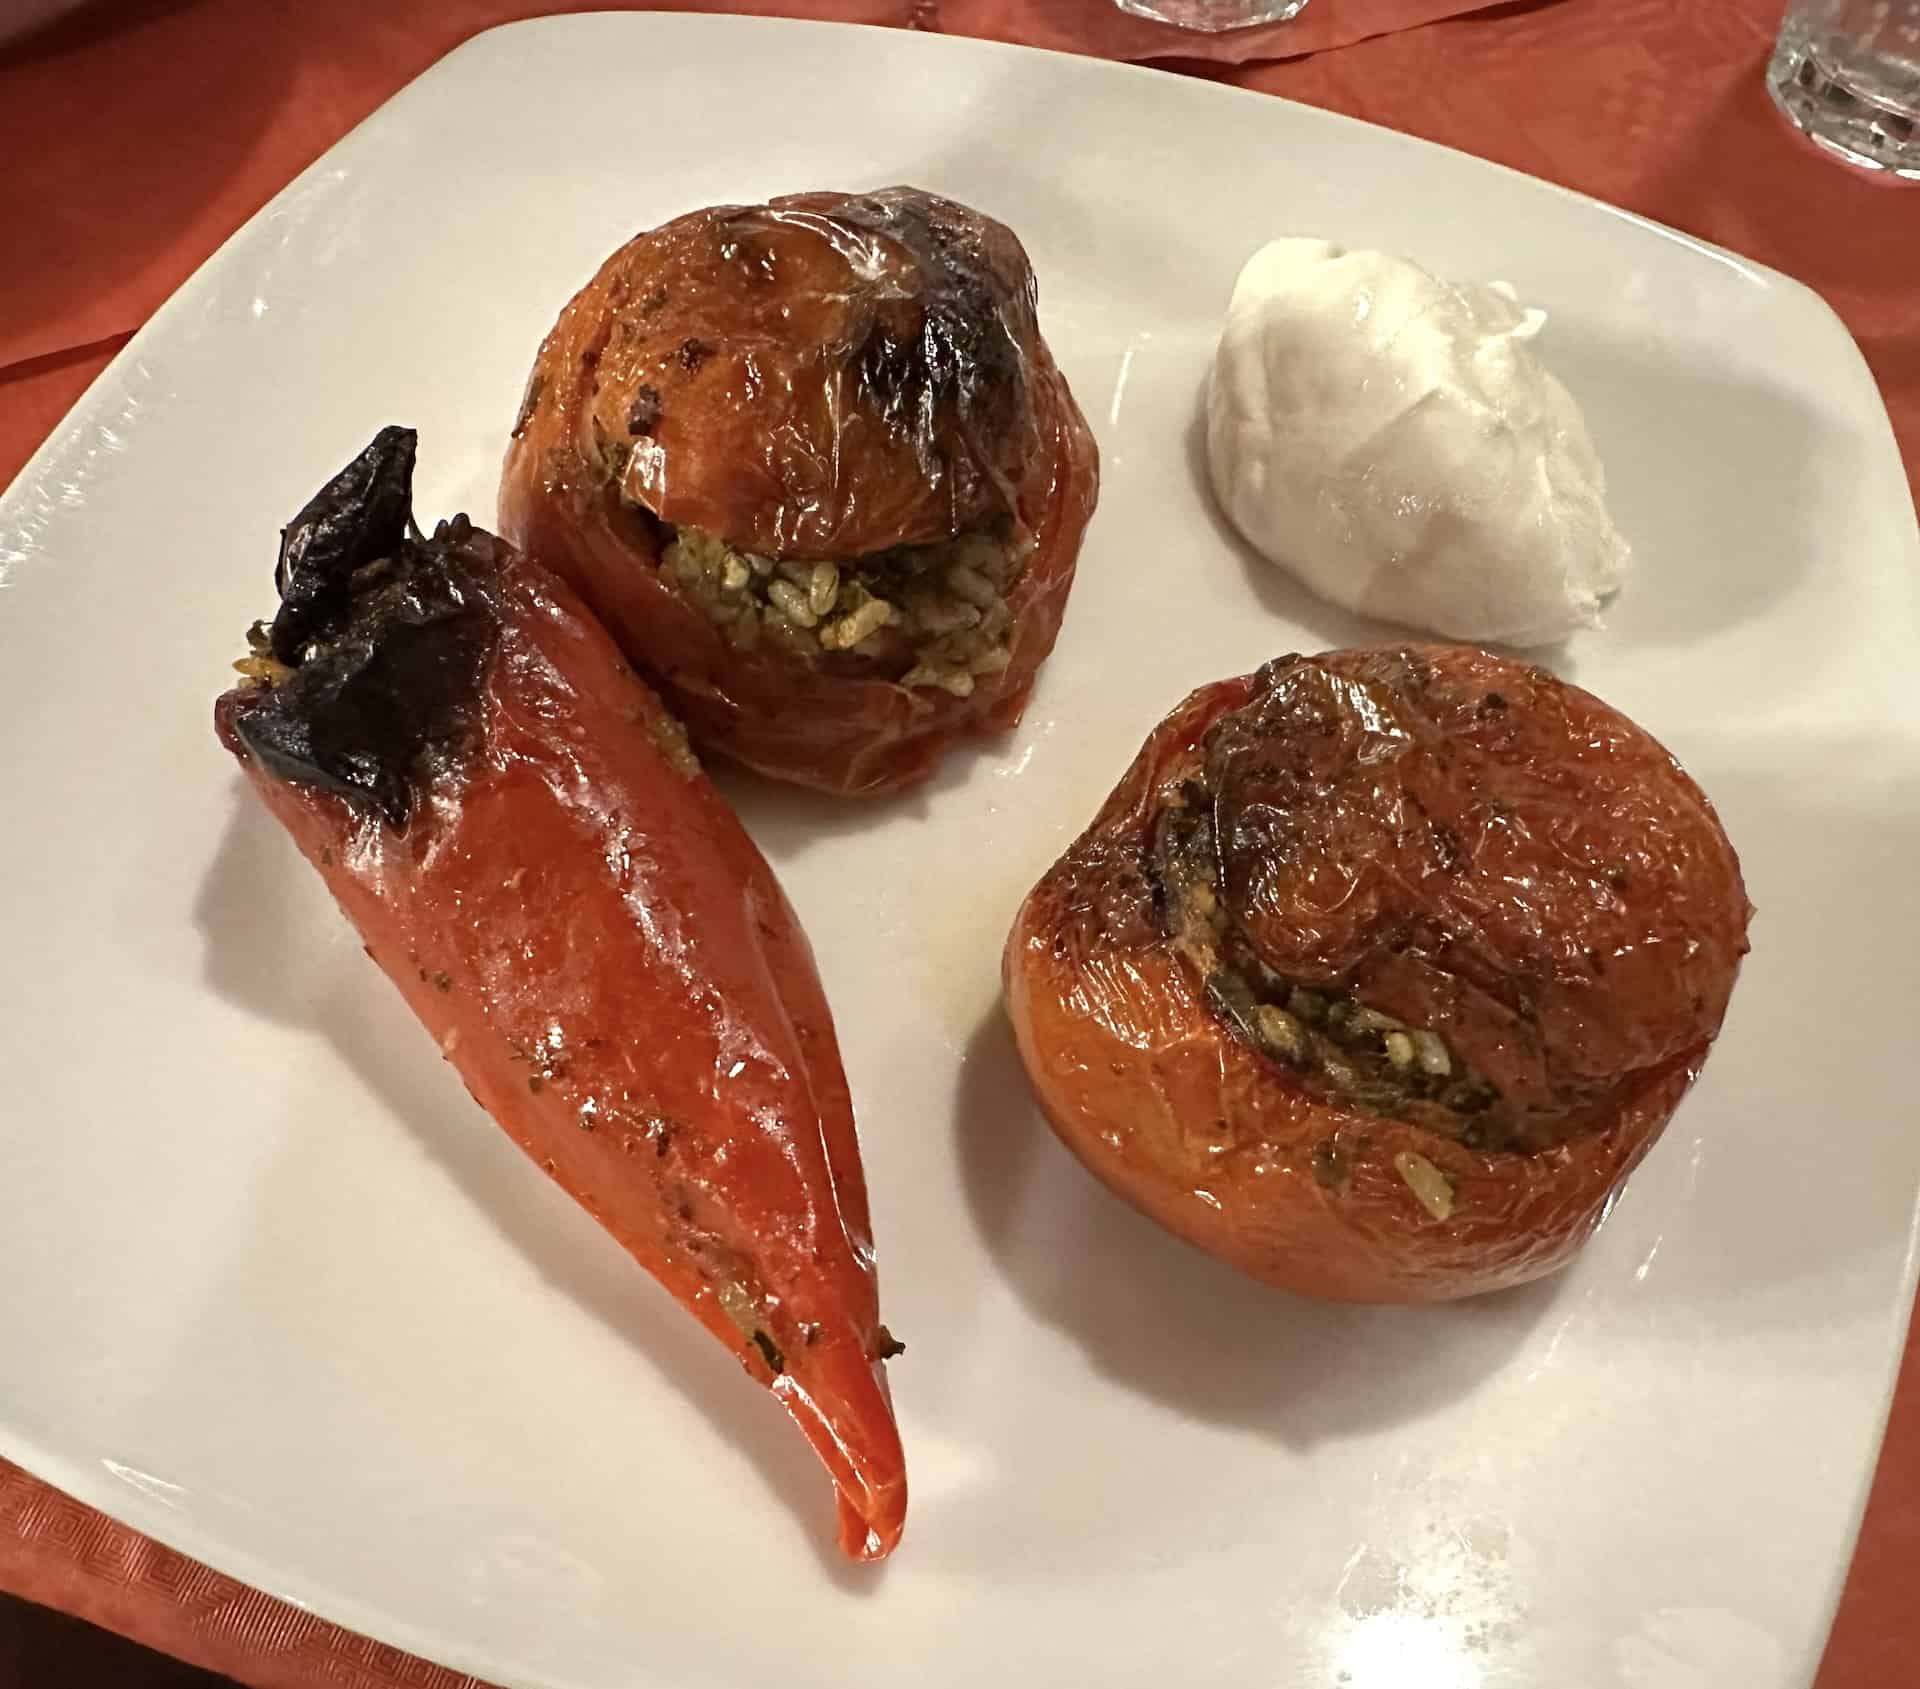 Stuffed tomatoes and peppers at Hotel Calypso at Agia Roumeli, Crete, Greece